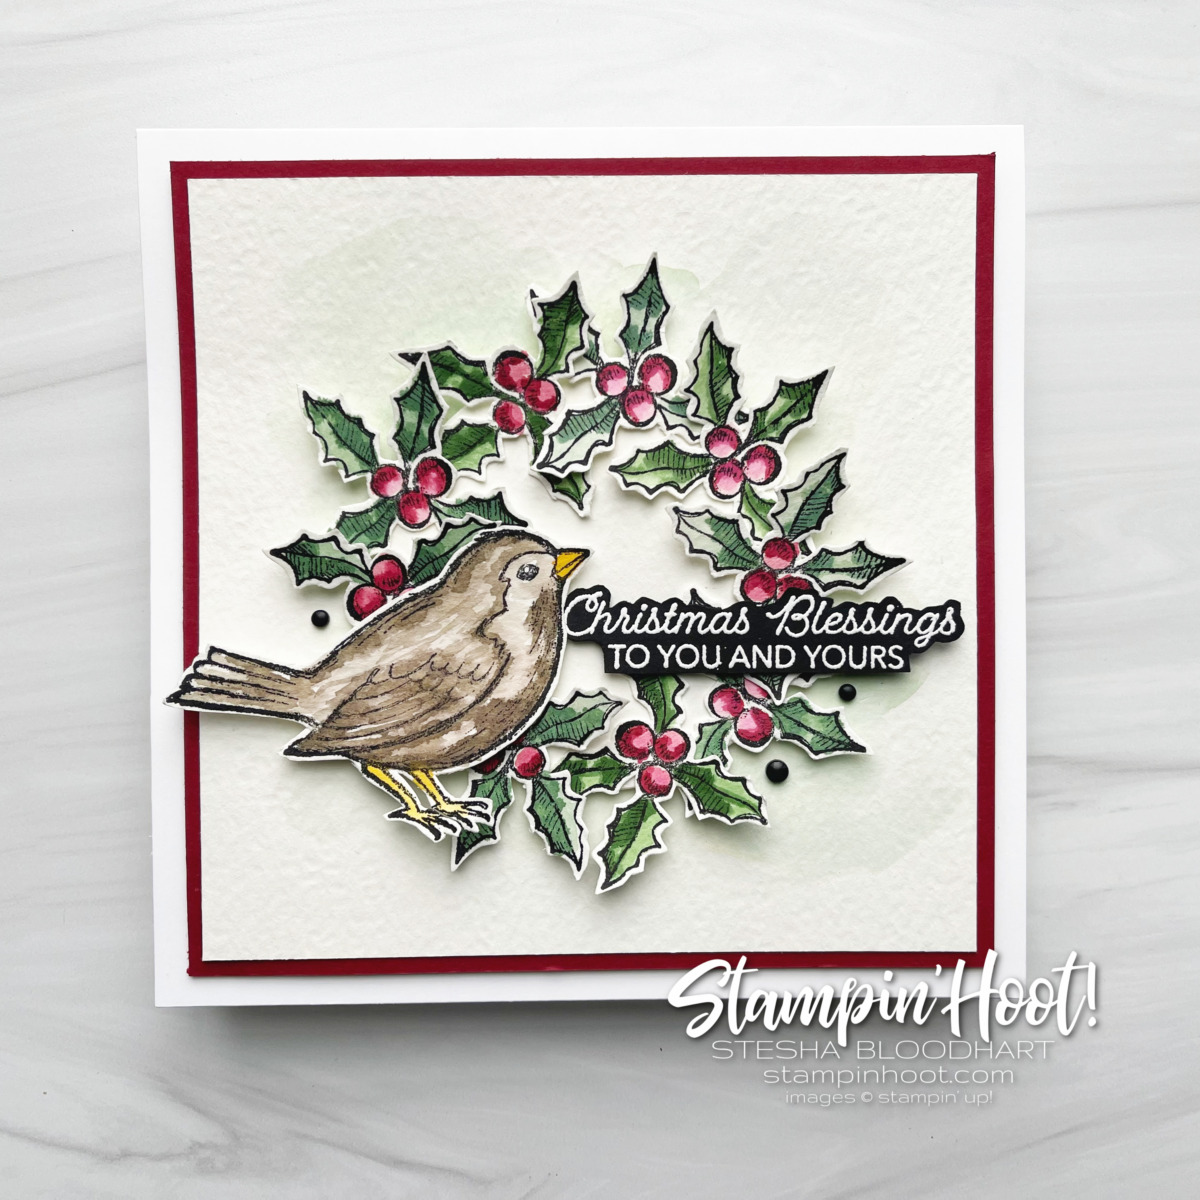 Create this card using the Happy Holly-Days Stamp Set by Stampin' Up! Retires January 3, 2022. GDP321 Color Challenge